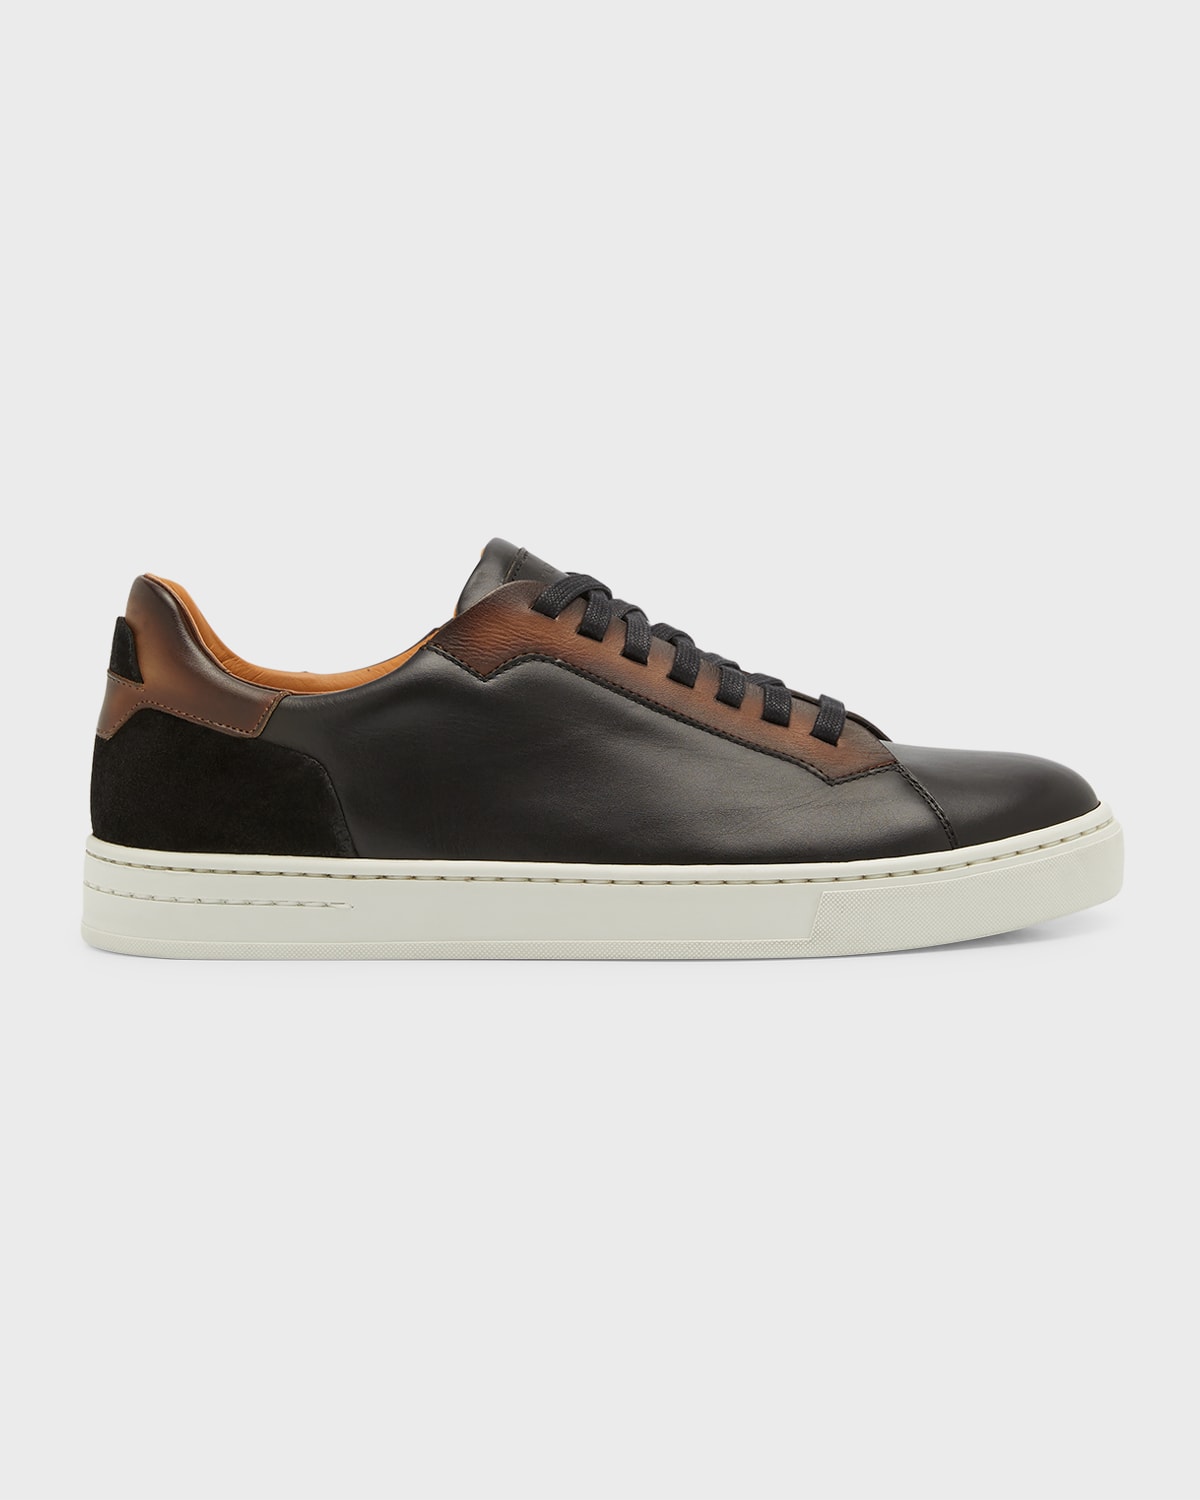 Magnanni Men's Amadeo Bicolor Leather Low-top Sneakers In Black